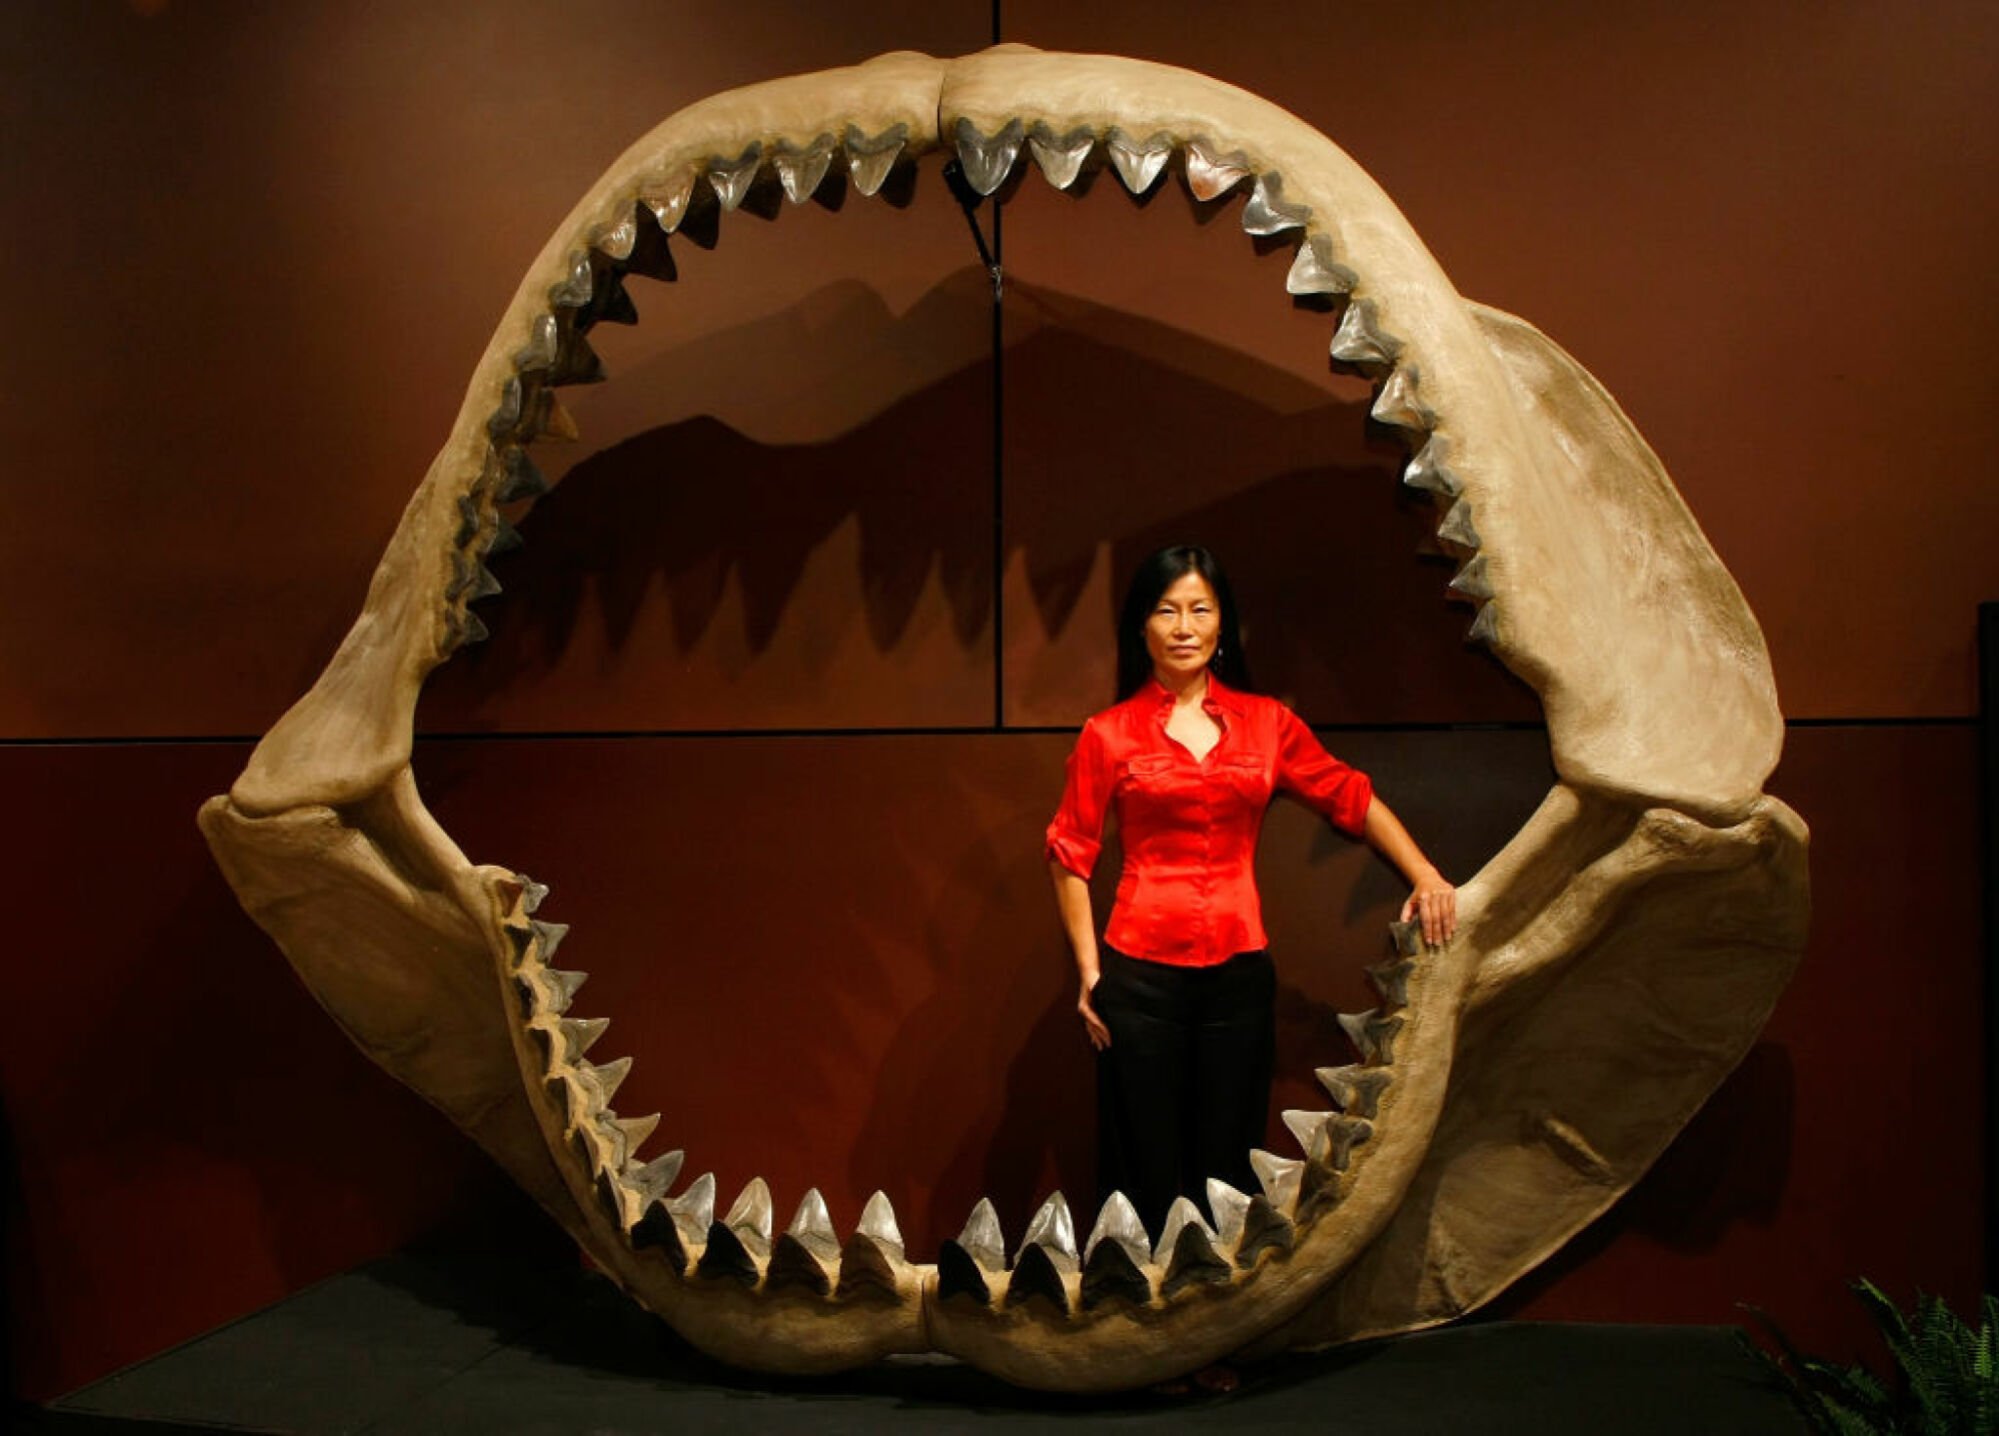 The partially reconstructed jaws of a megalodon with a person standing inside.